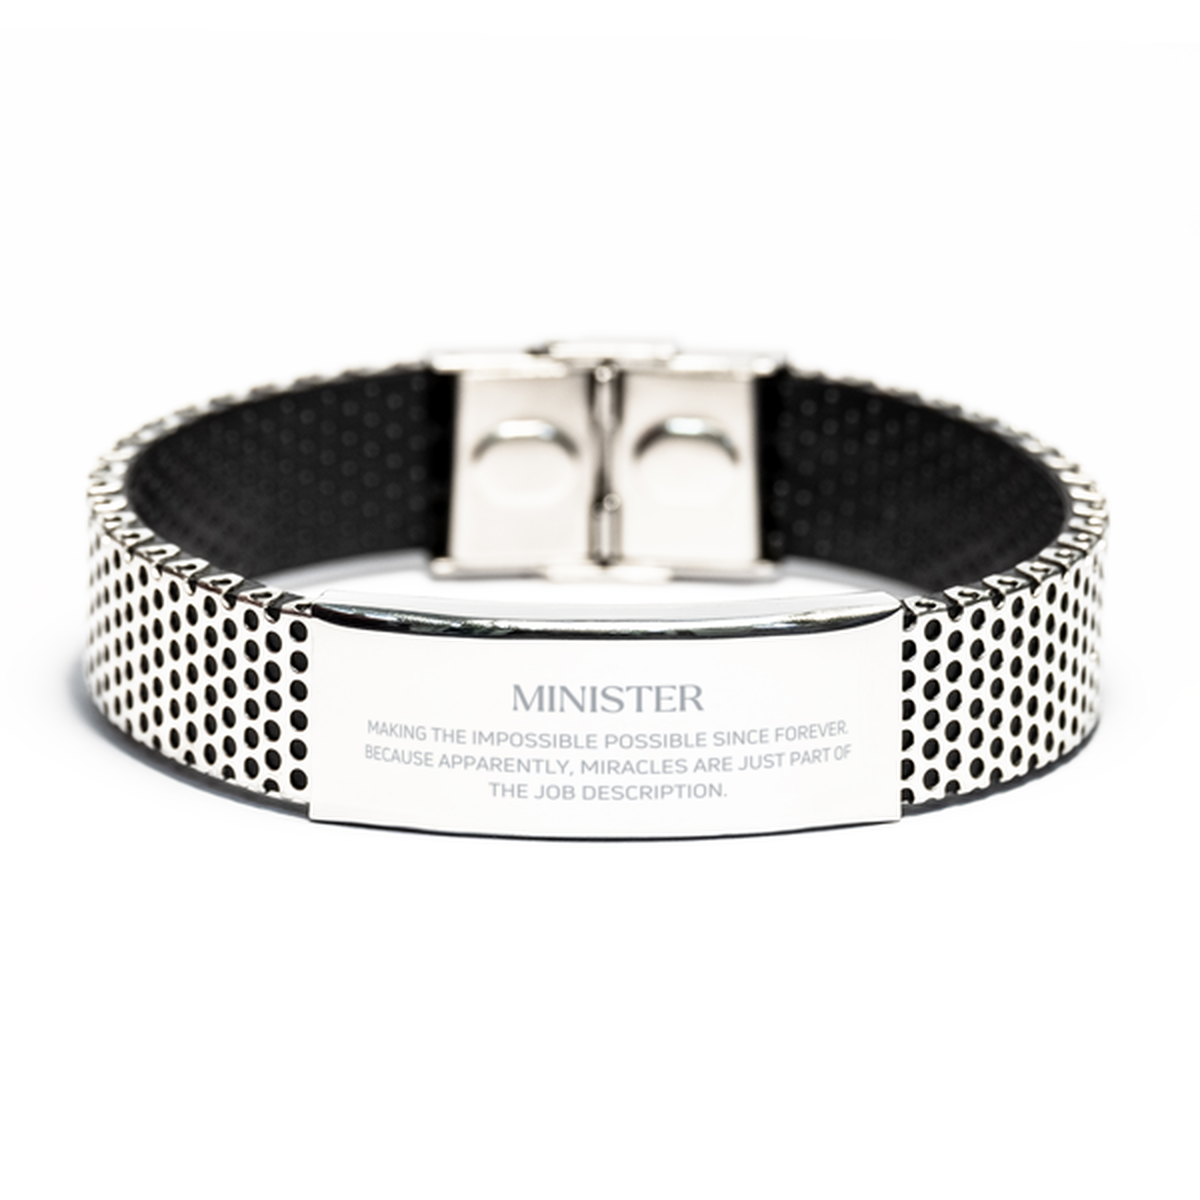 Funny Minister Gifts, Miracles are just part of the job description, Inspirational Birthday Stainless Steel Bracelet For Minister, Men, Women, Coworkers, Friends, Boss